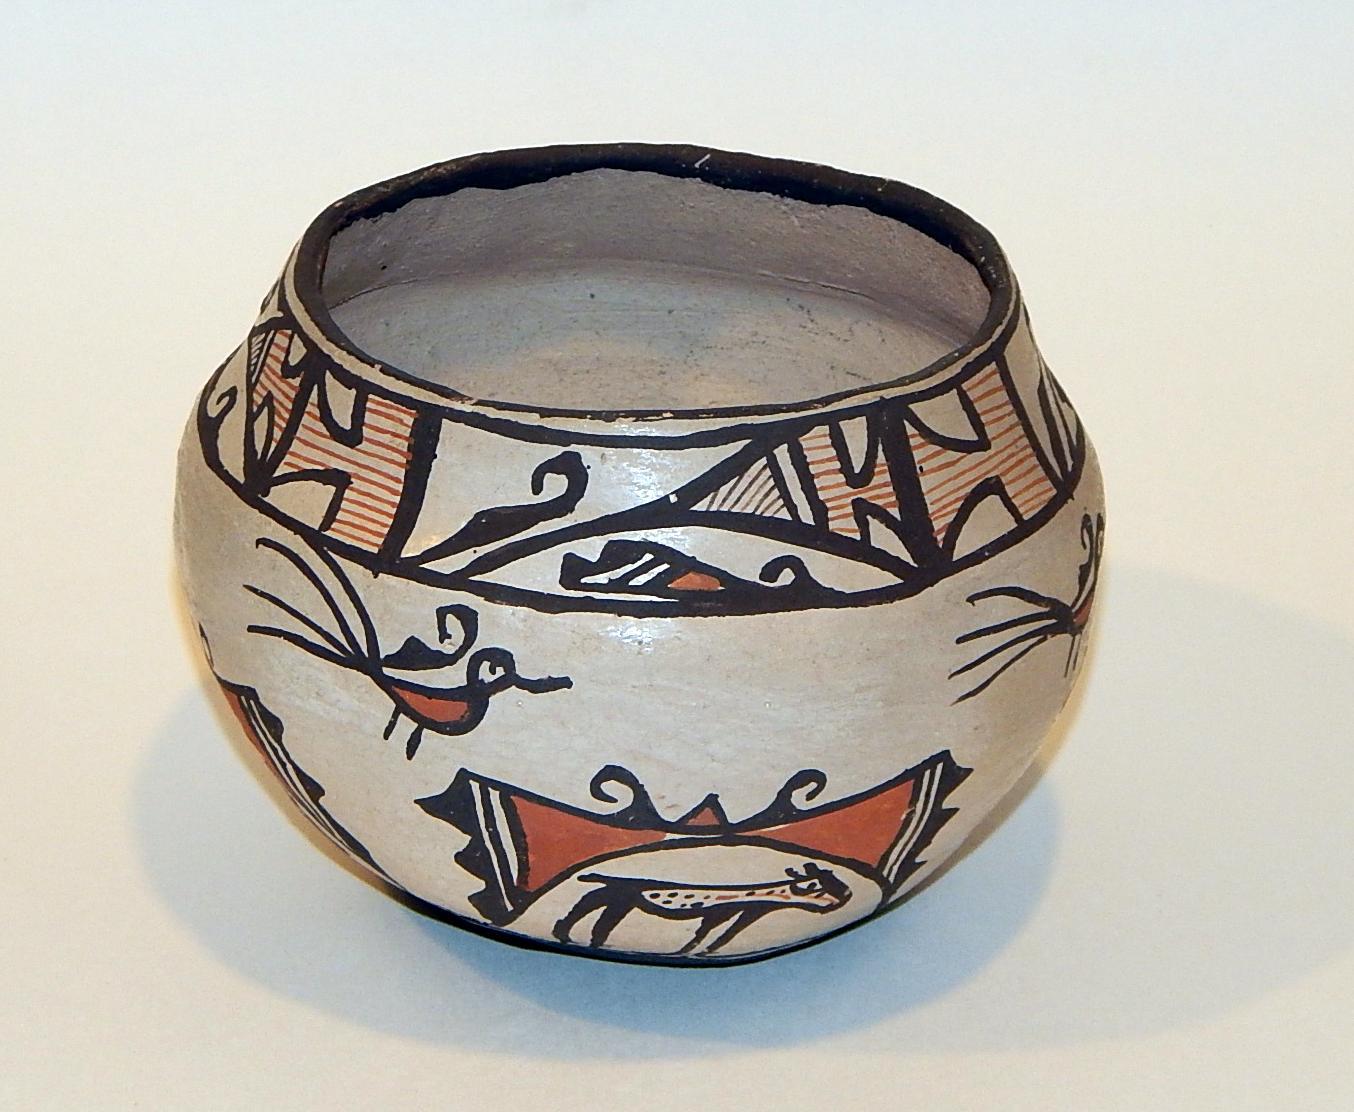 Zuni decorated ceramic pot
hand painted with Heartline deer motif
Measures: 4 ½” H x 5 1/2